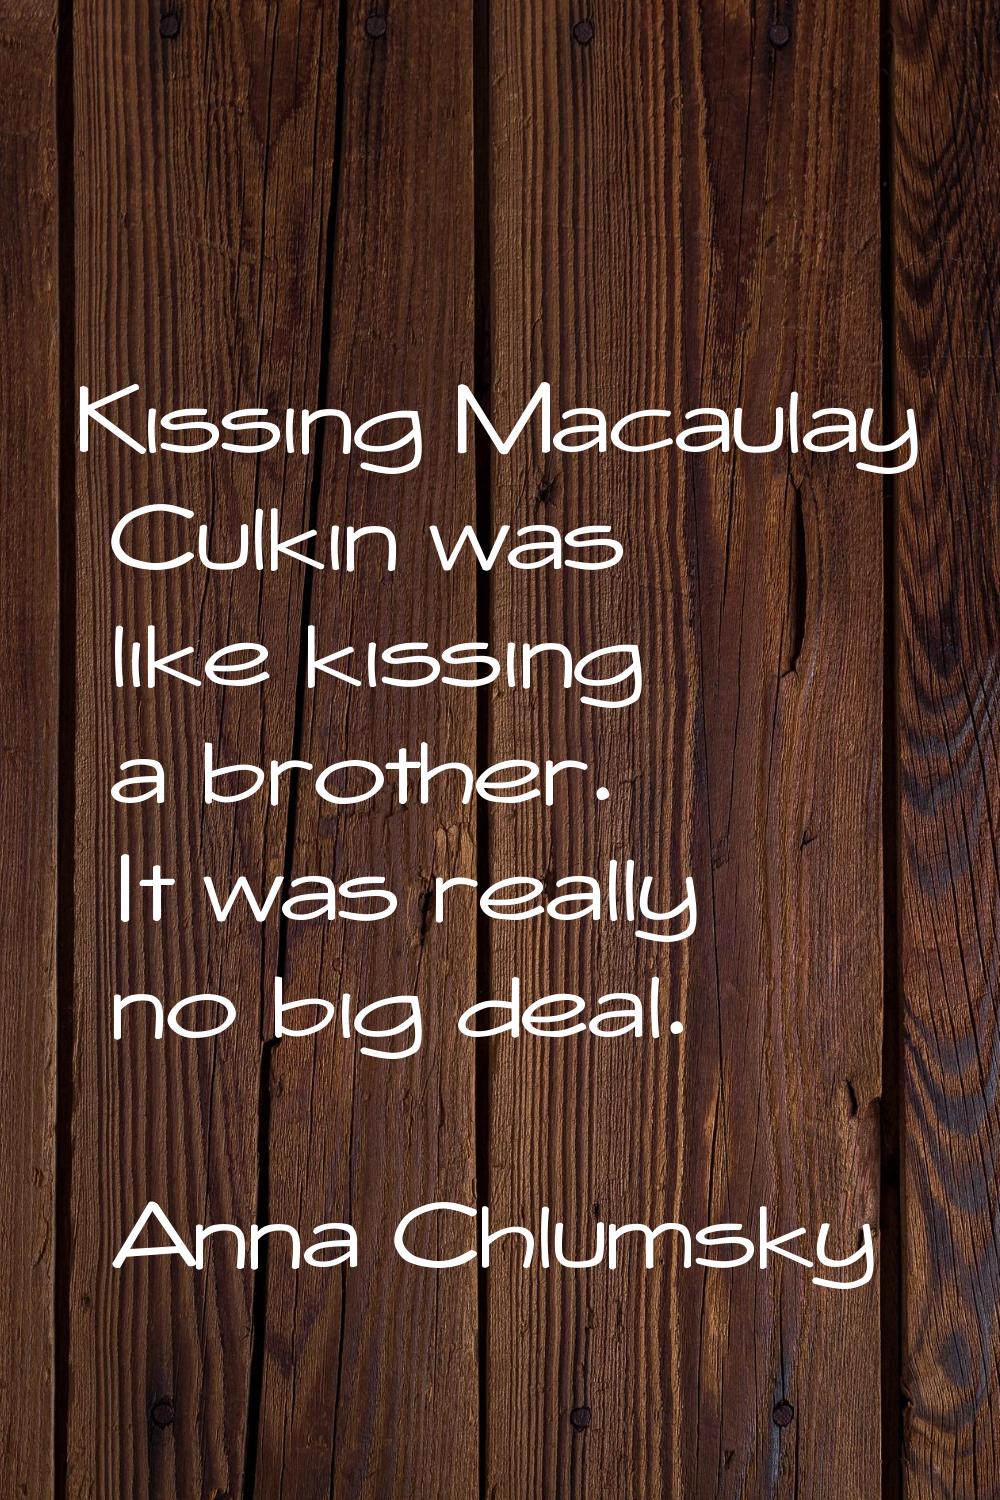 Kissing Macaulay Culkin was like kissing a brother. It was really no big deal.